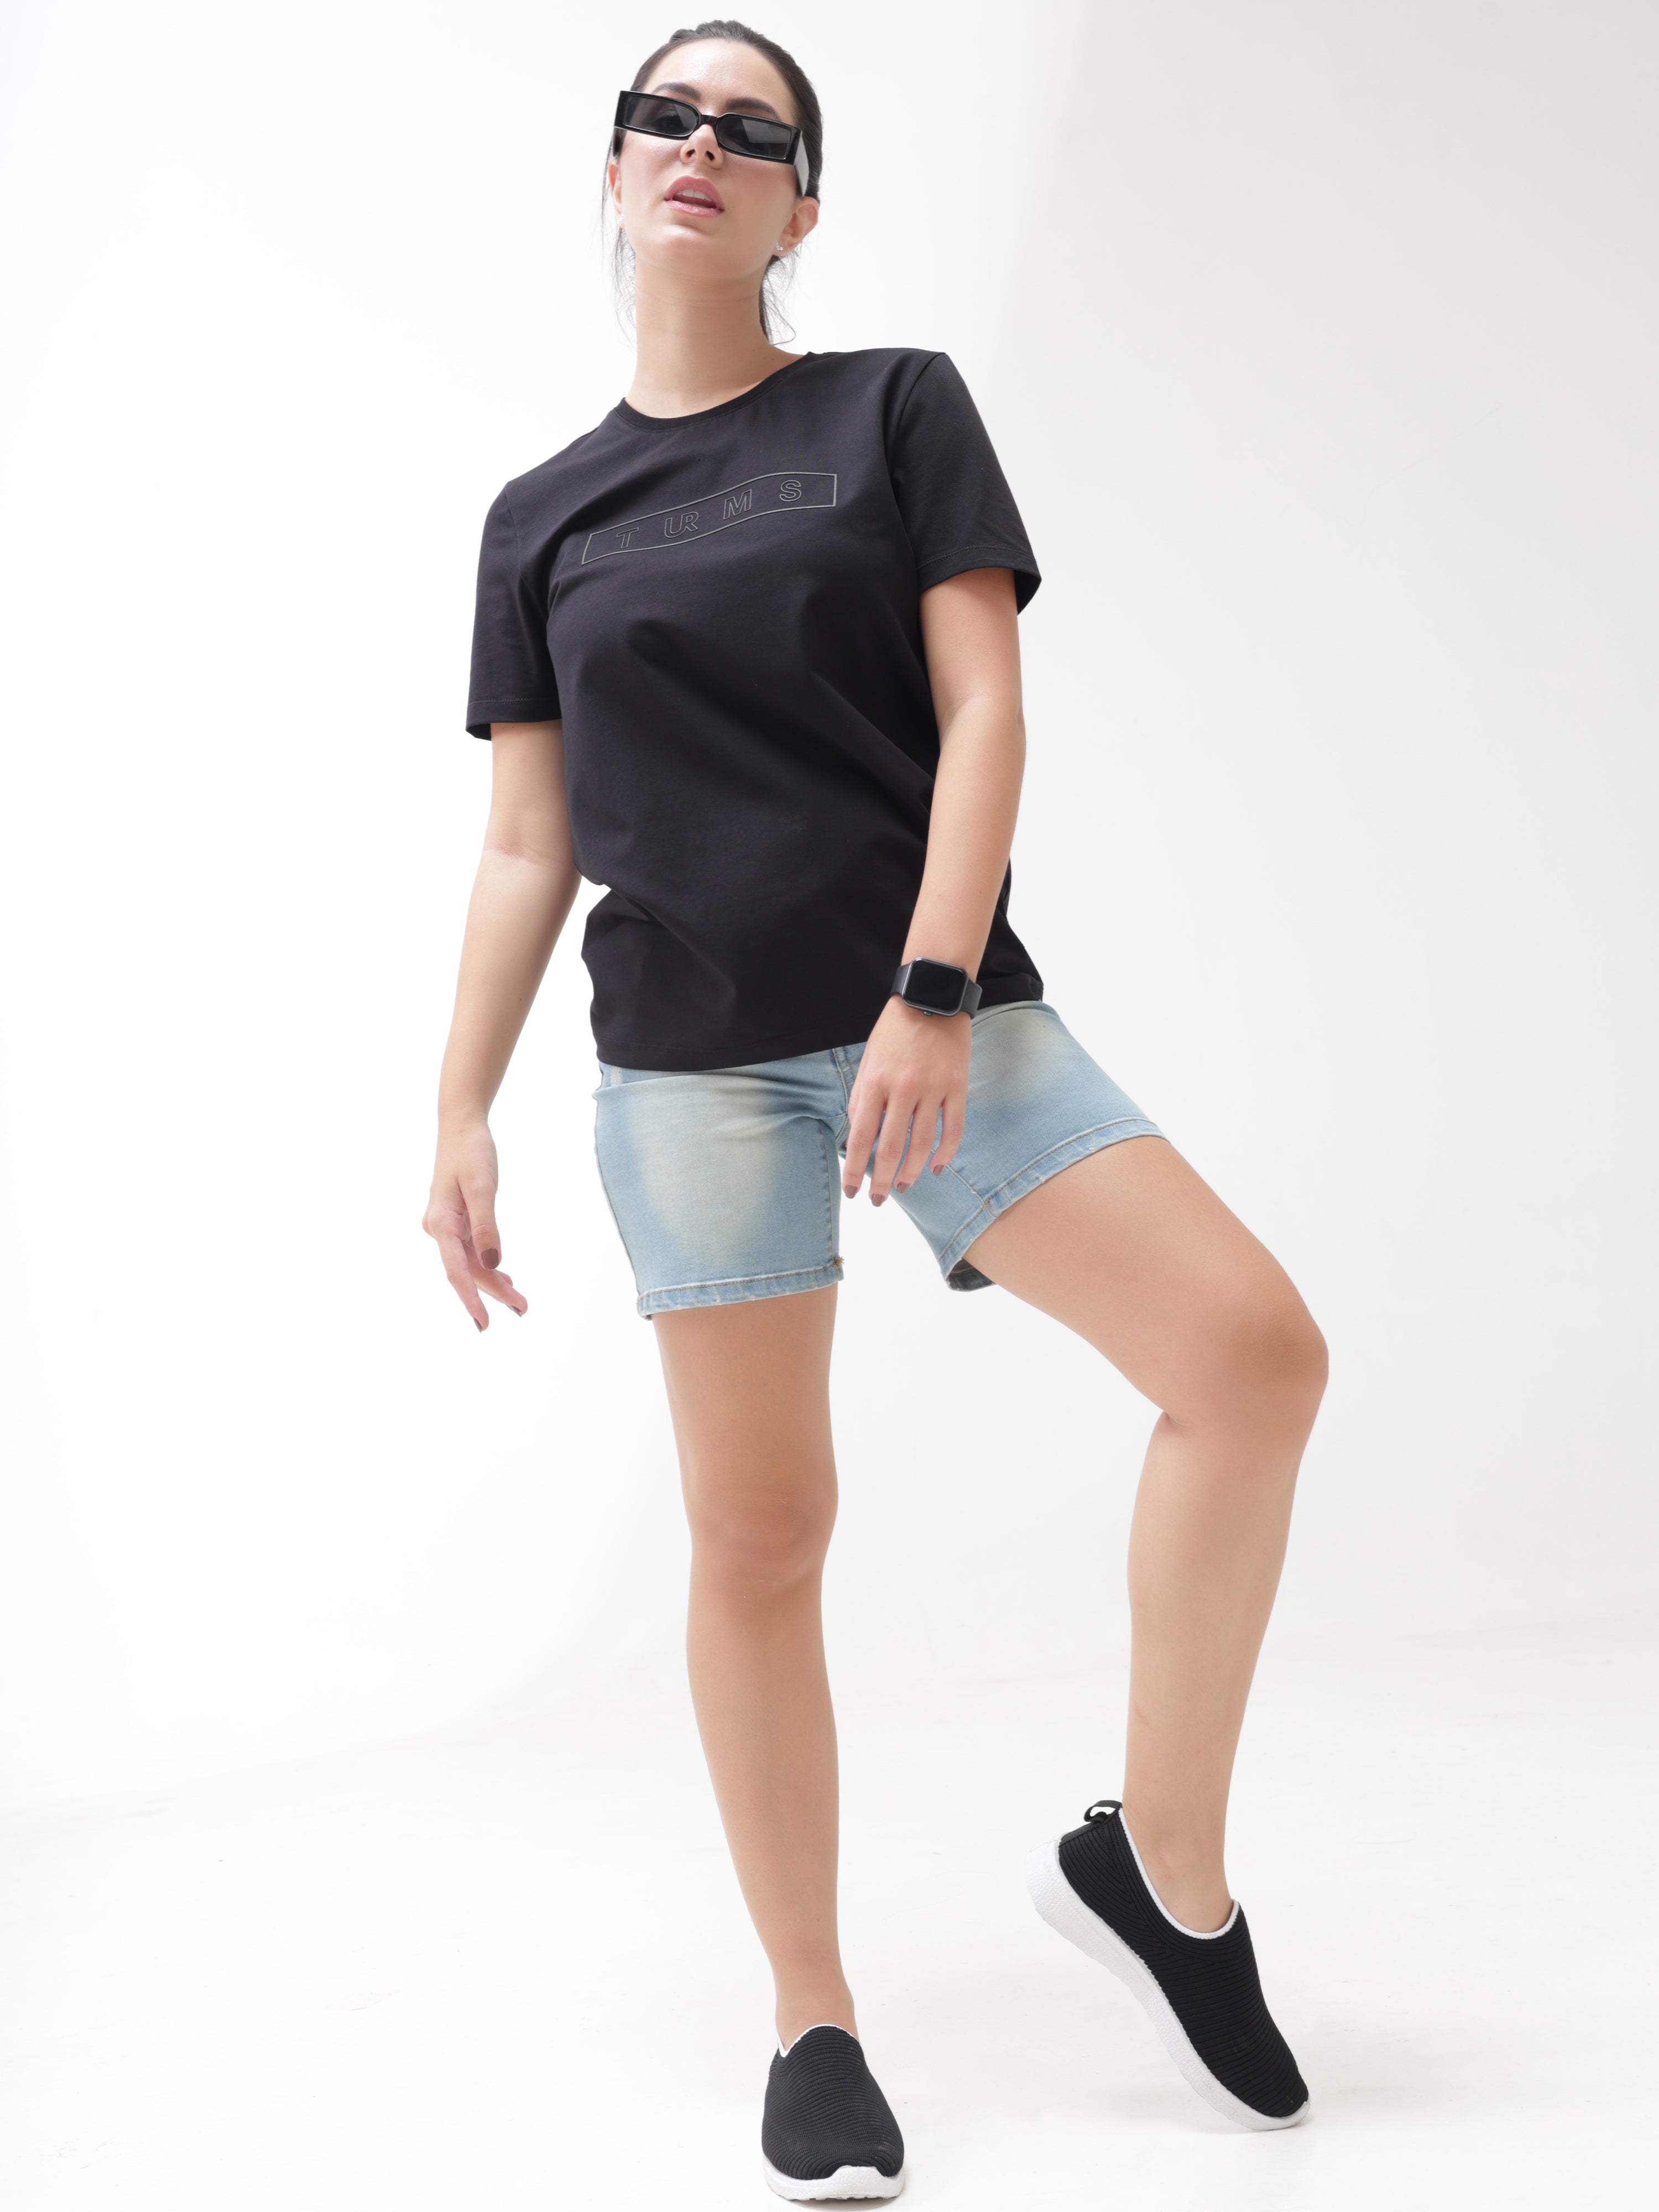 Woman wearing Midnight Elegance black anti-stain, anti-odor, stretchable Turms T-shirt, trendy and intelligent apparel for everyday comfort.